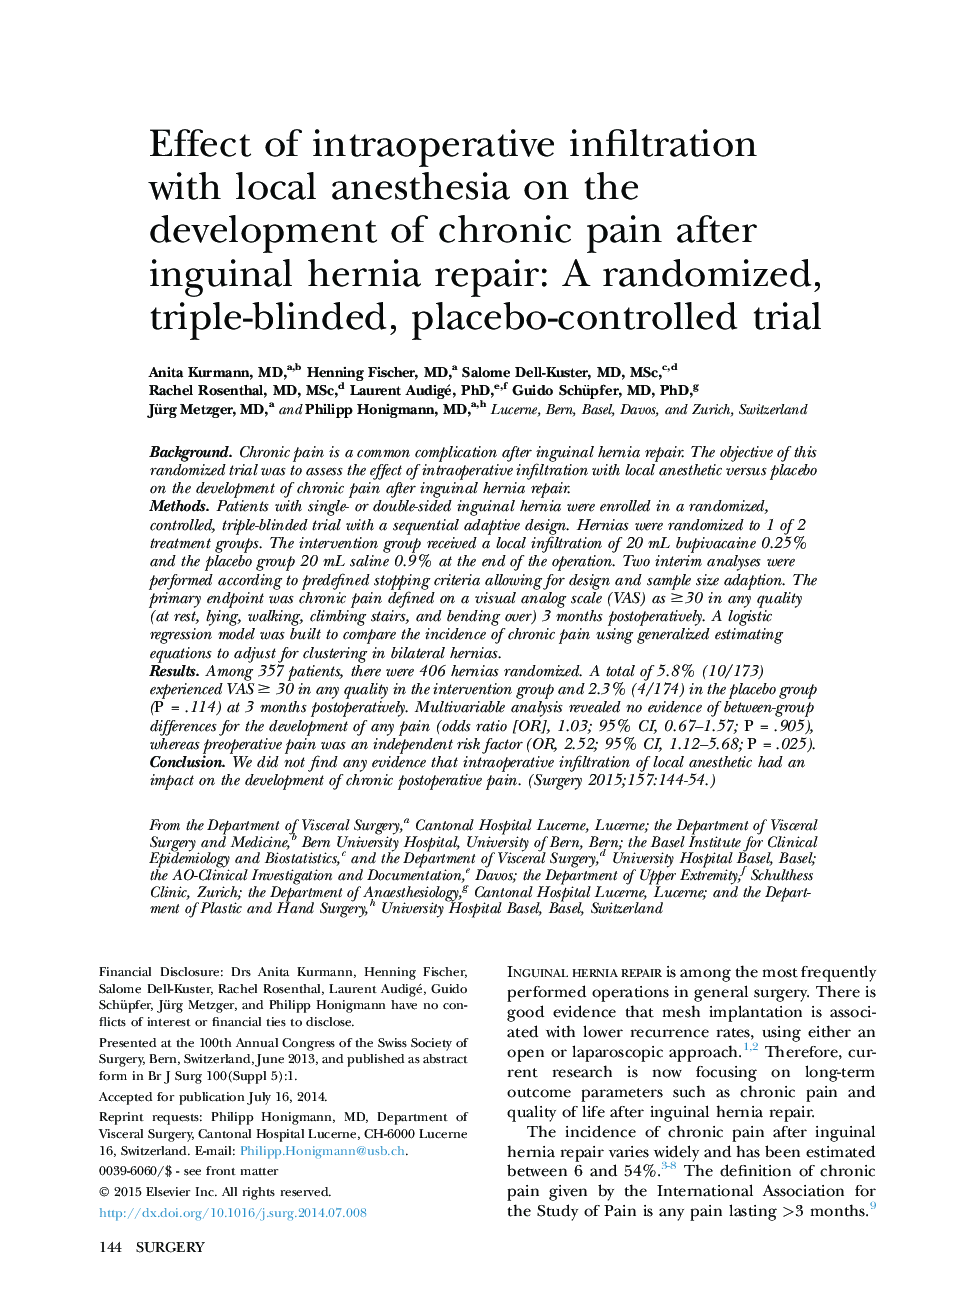 Effect of intraoperative infiltration with local anesthesia on the development of chronic pain after inguinal hernia repair: A randomized, triple-blinded, placebo-controlled trial 